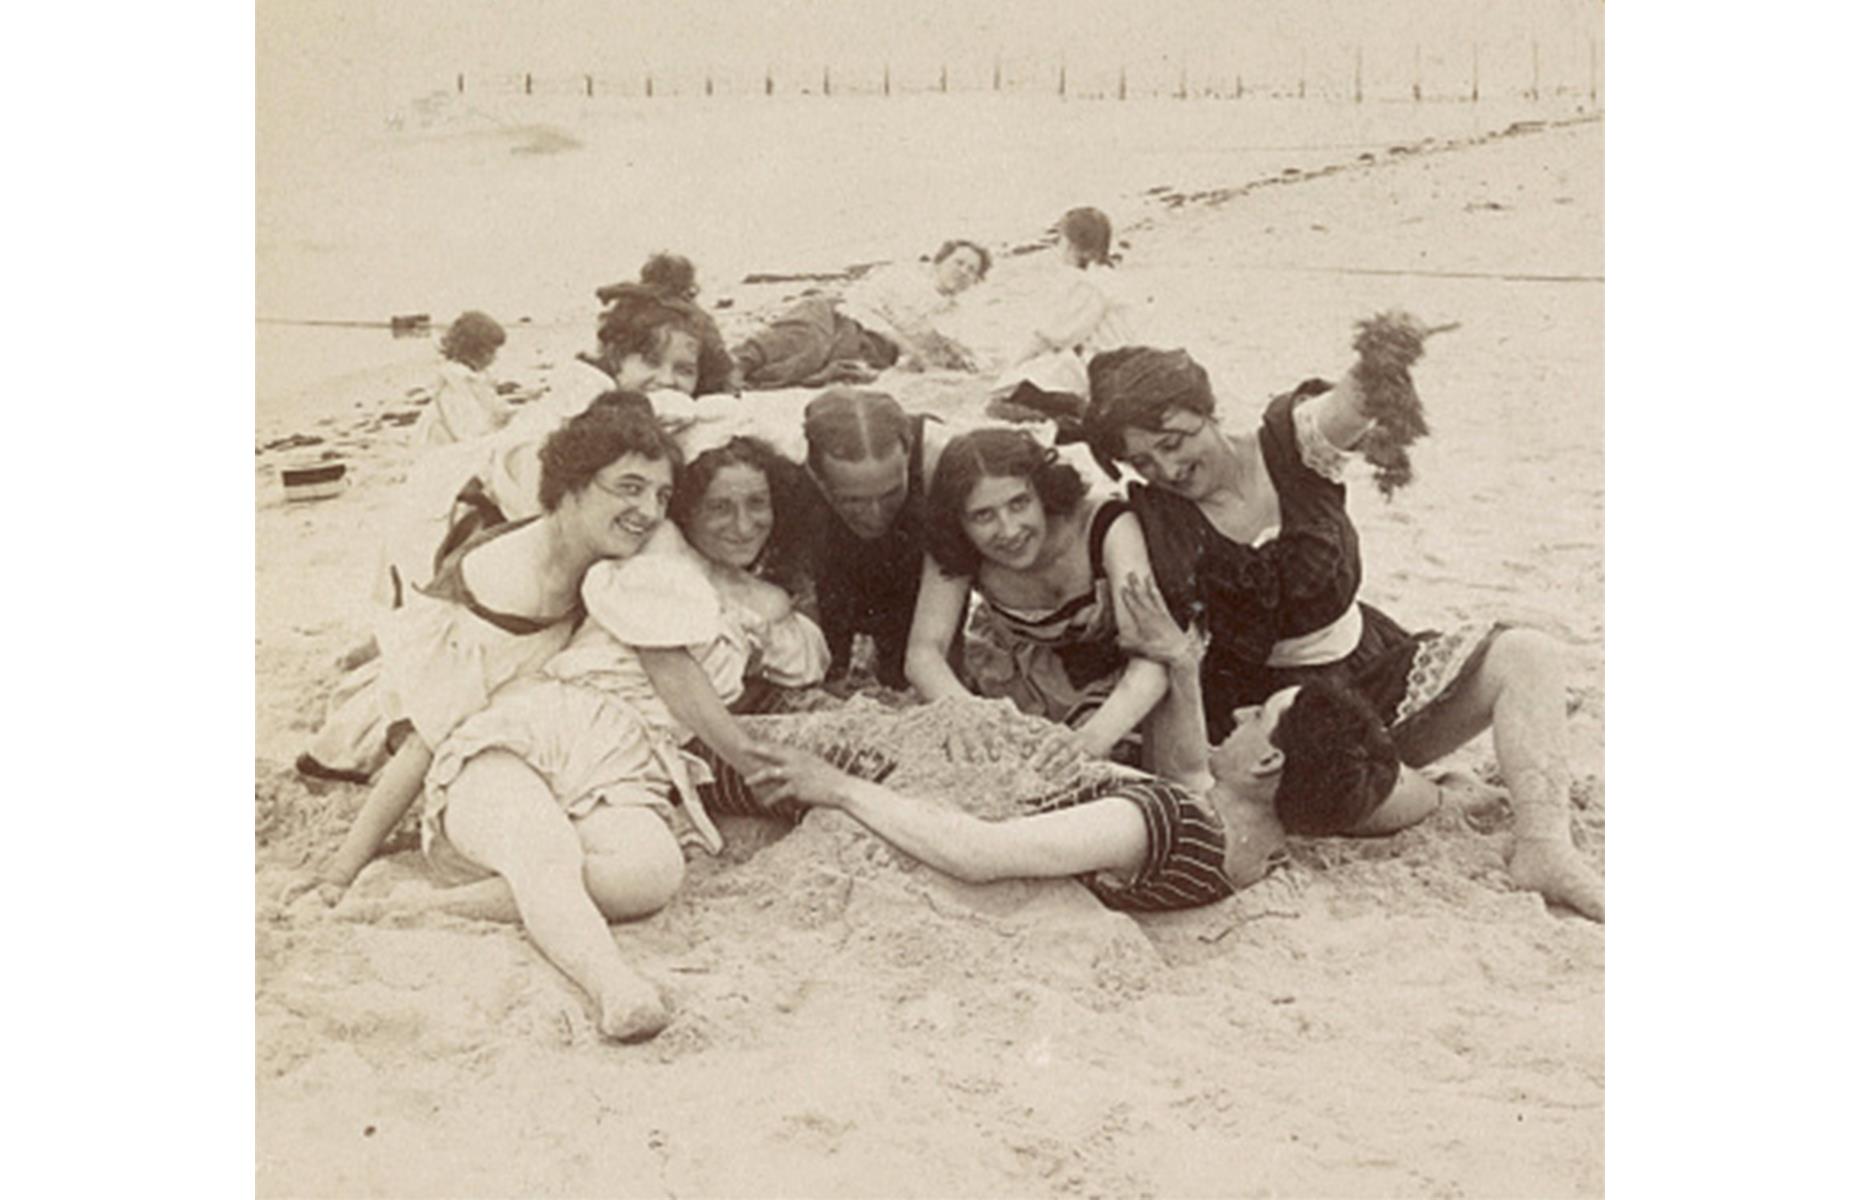 Despite Coney Island's rich pick of parks and amusements, the beach alone was enough for some vacationers. This photo dates right back to 1897 and captures a group of young sun-seekers burying their friend in the sand.